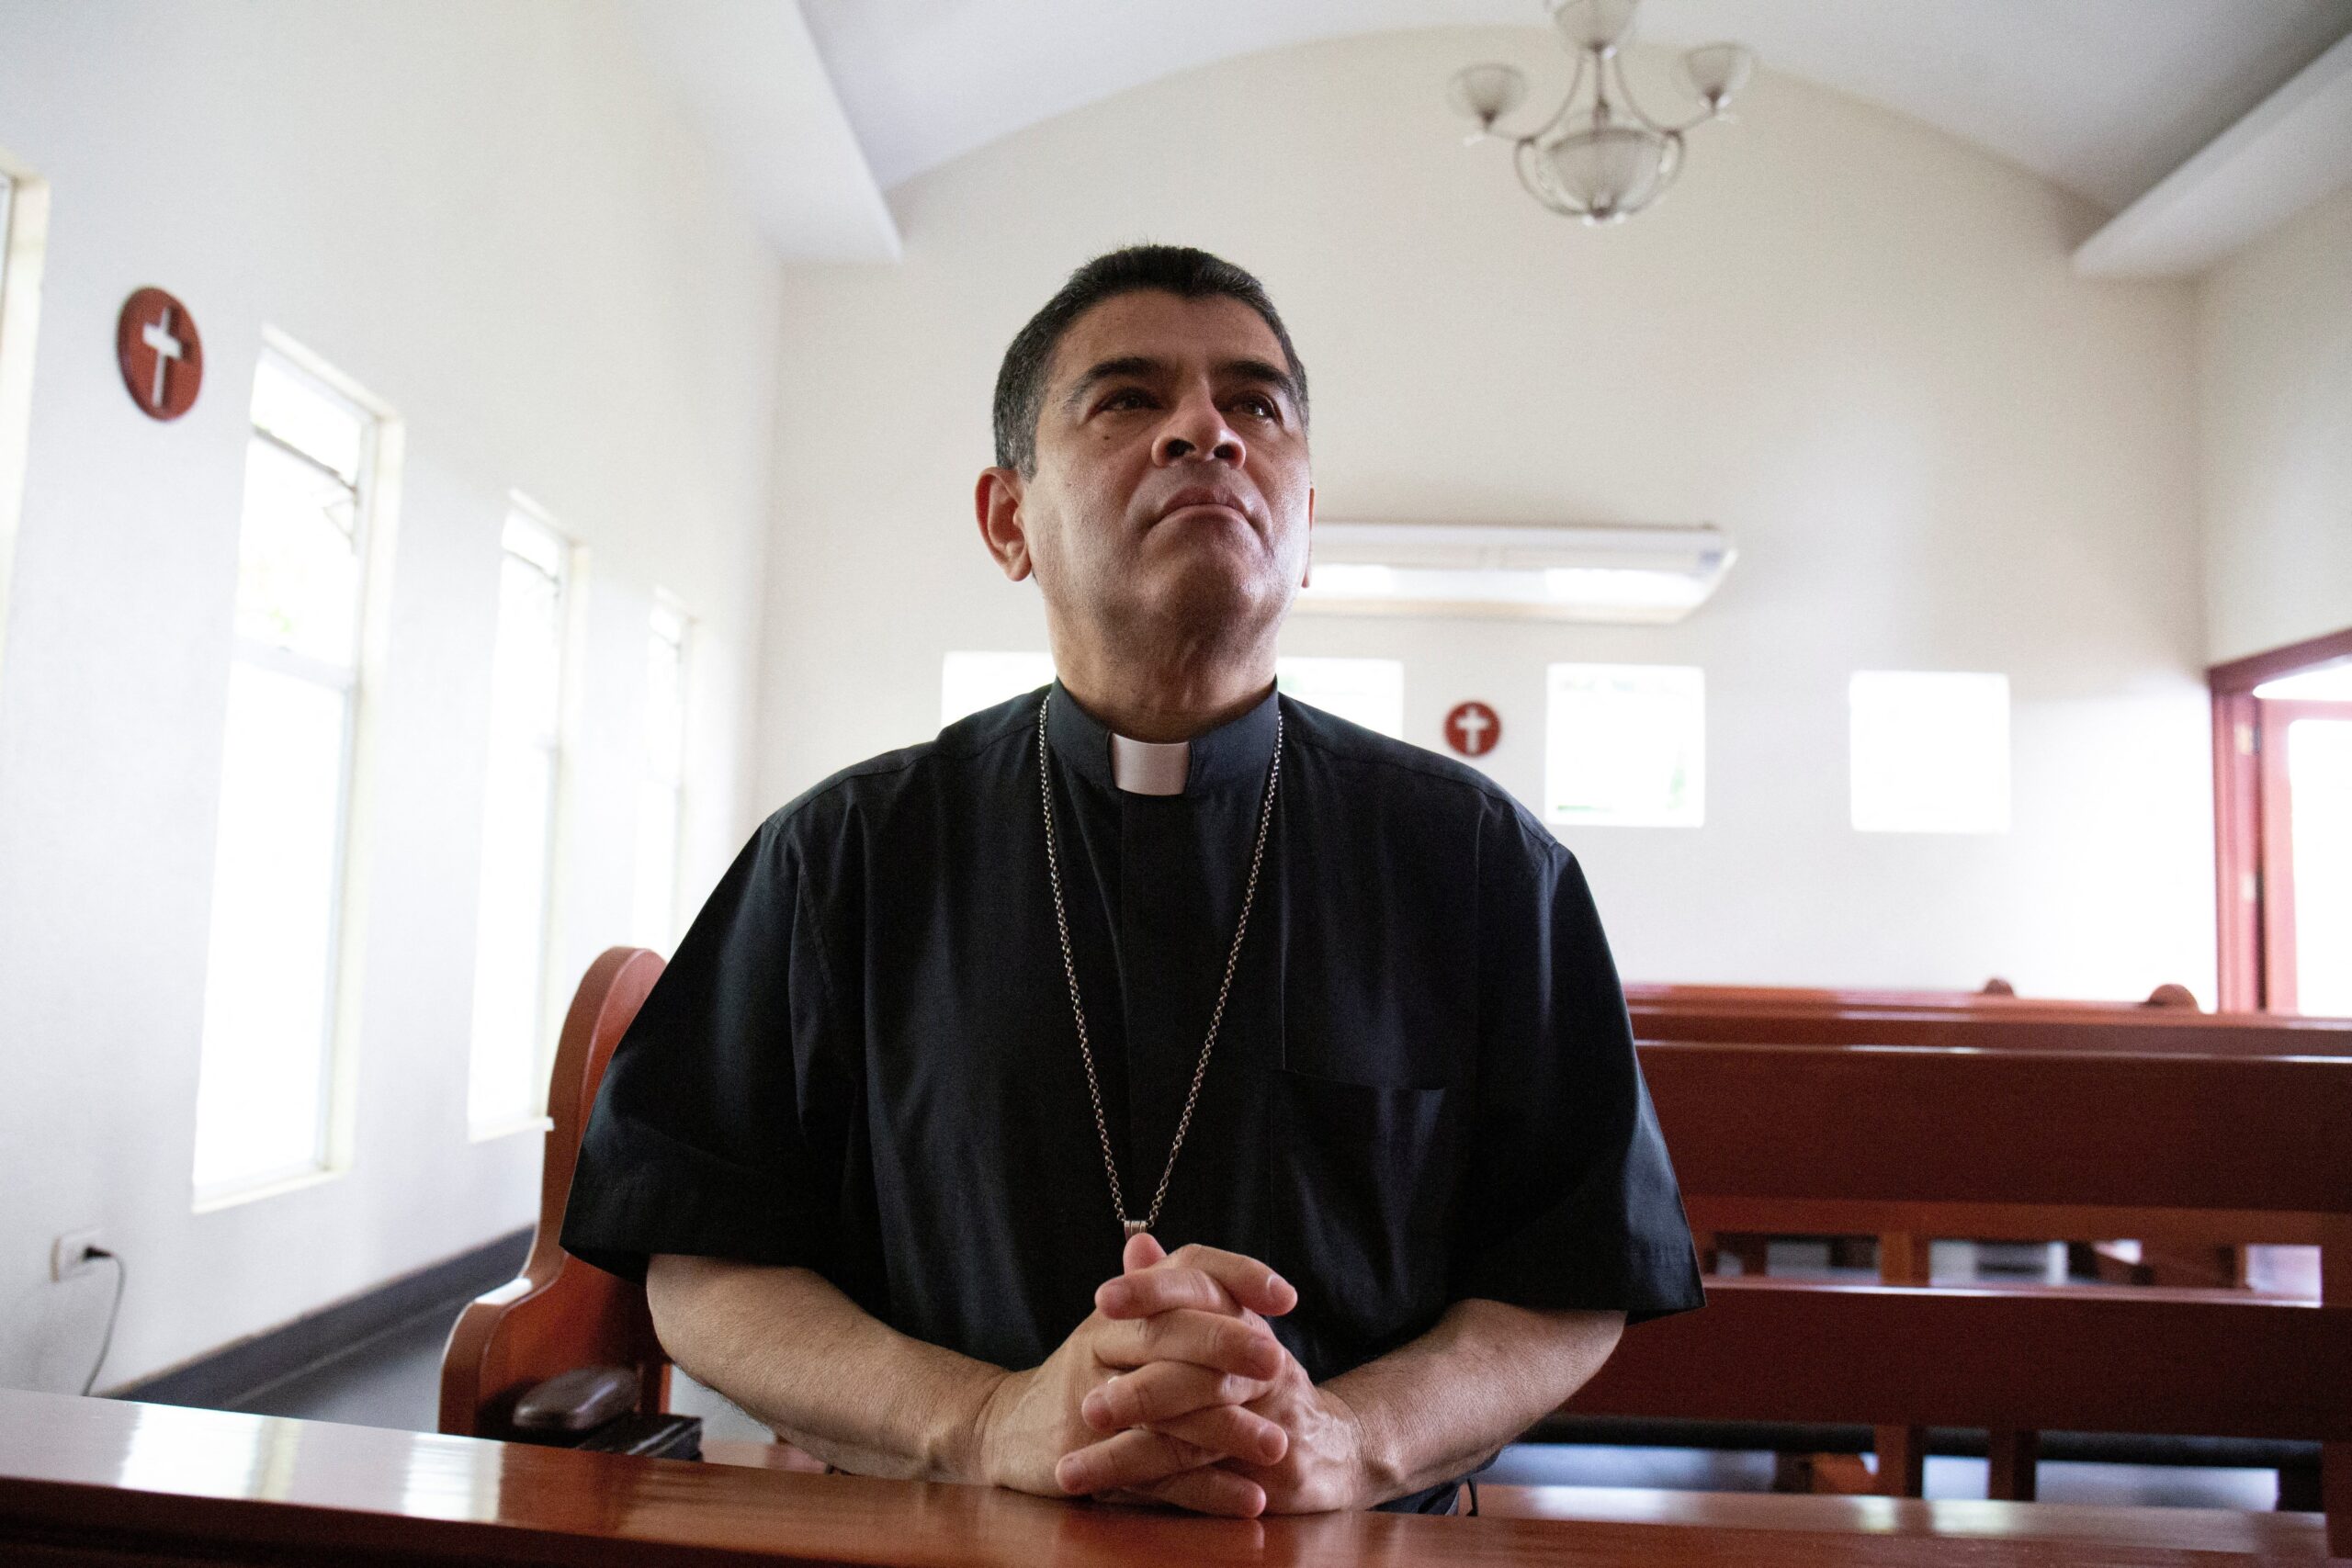 Bishop Rolando Álvarez of Matagalpa, Nicaragua, a frequent critic of Nicaraguan President Daniel Ortega, prays at a Catholic church in Managua May 20, 2022. After spending over 500 days in jail, the Ortega regime released him and 18 other imprisoned clergymen Jan. 14, 2024, exiling them to Rome. (OSV News photo/Maynor Valenzuela, Reuters)